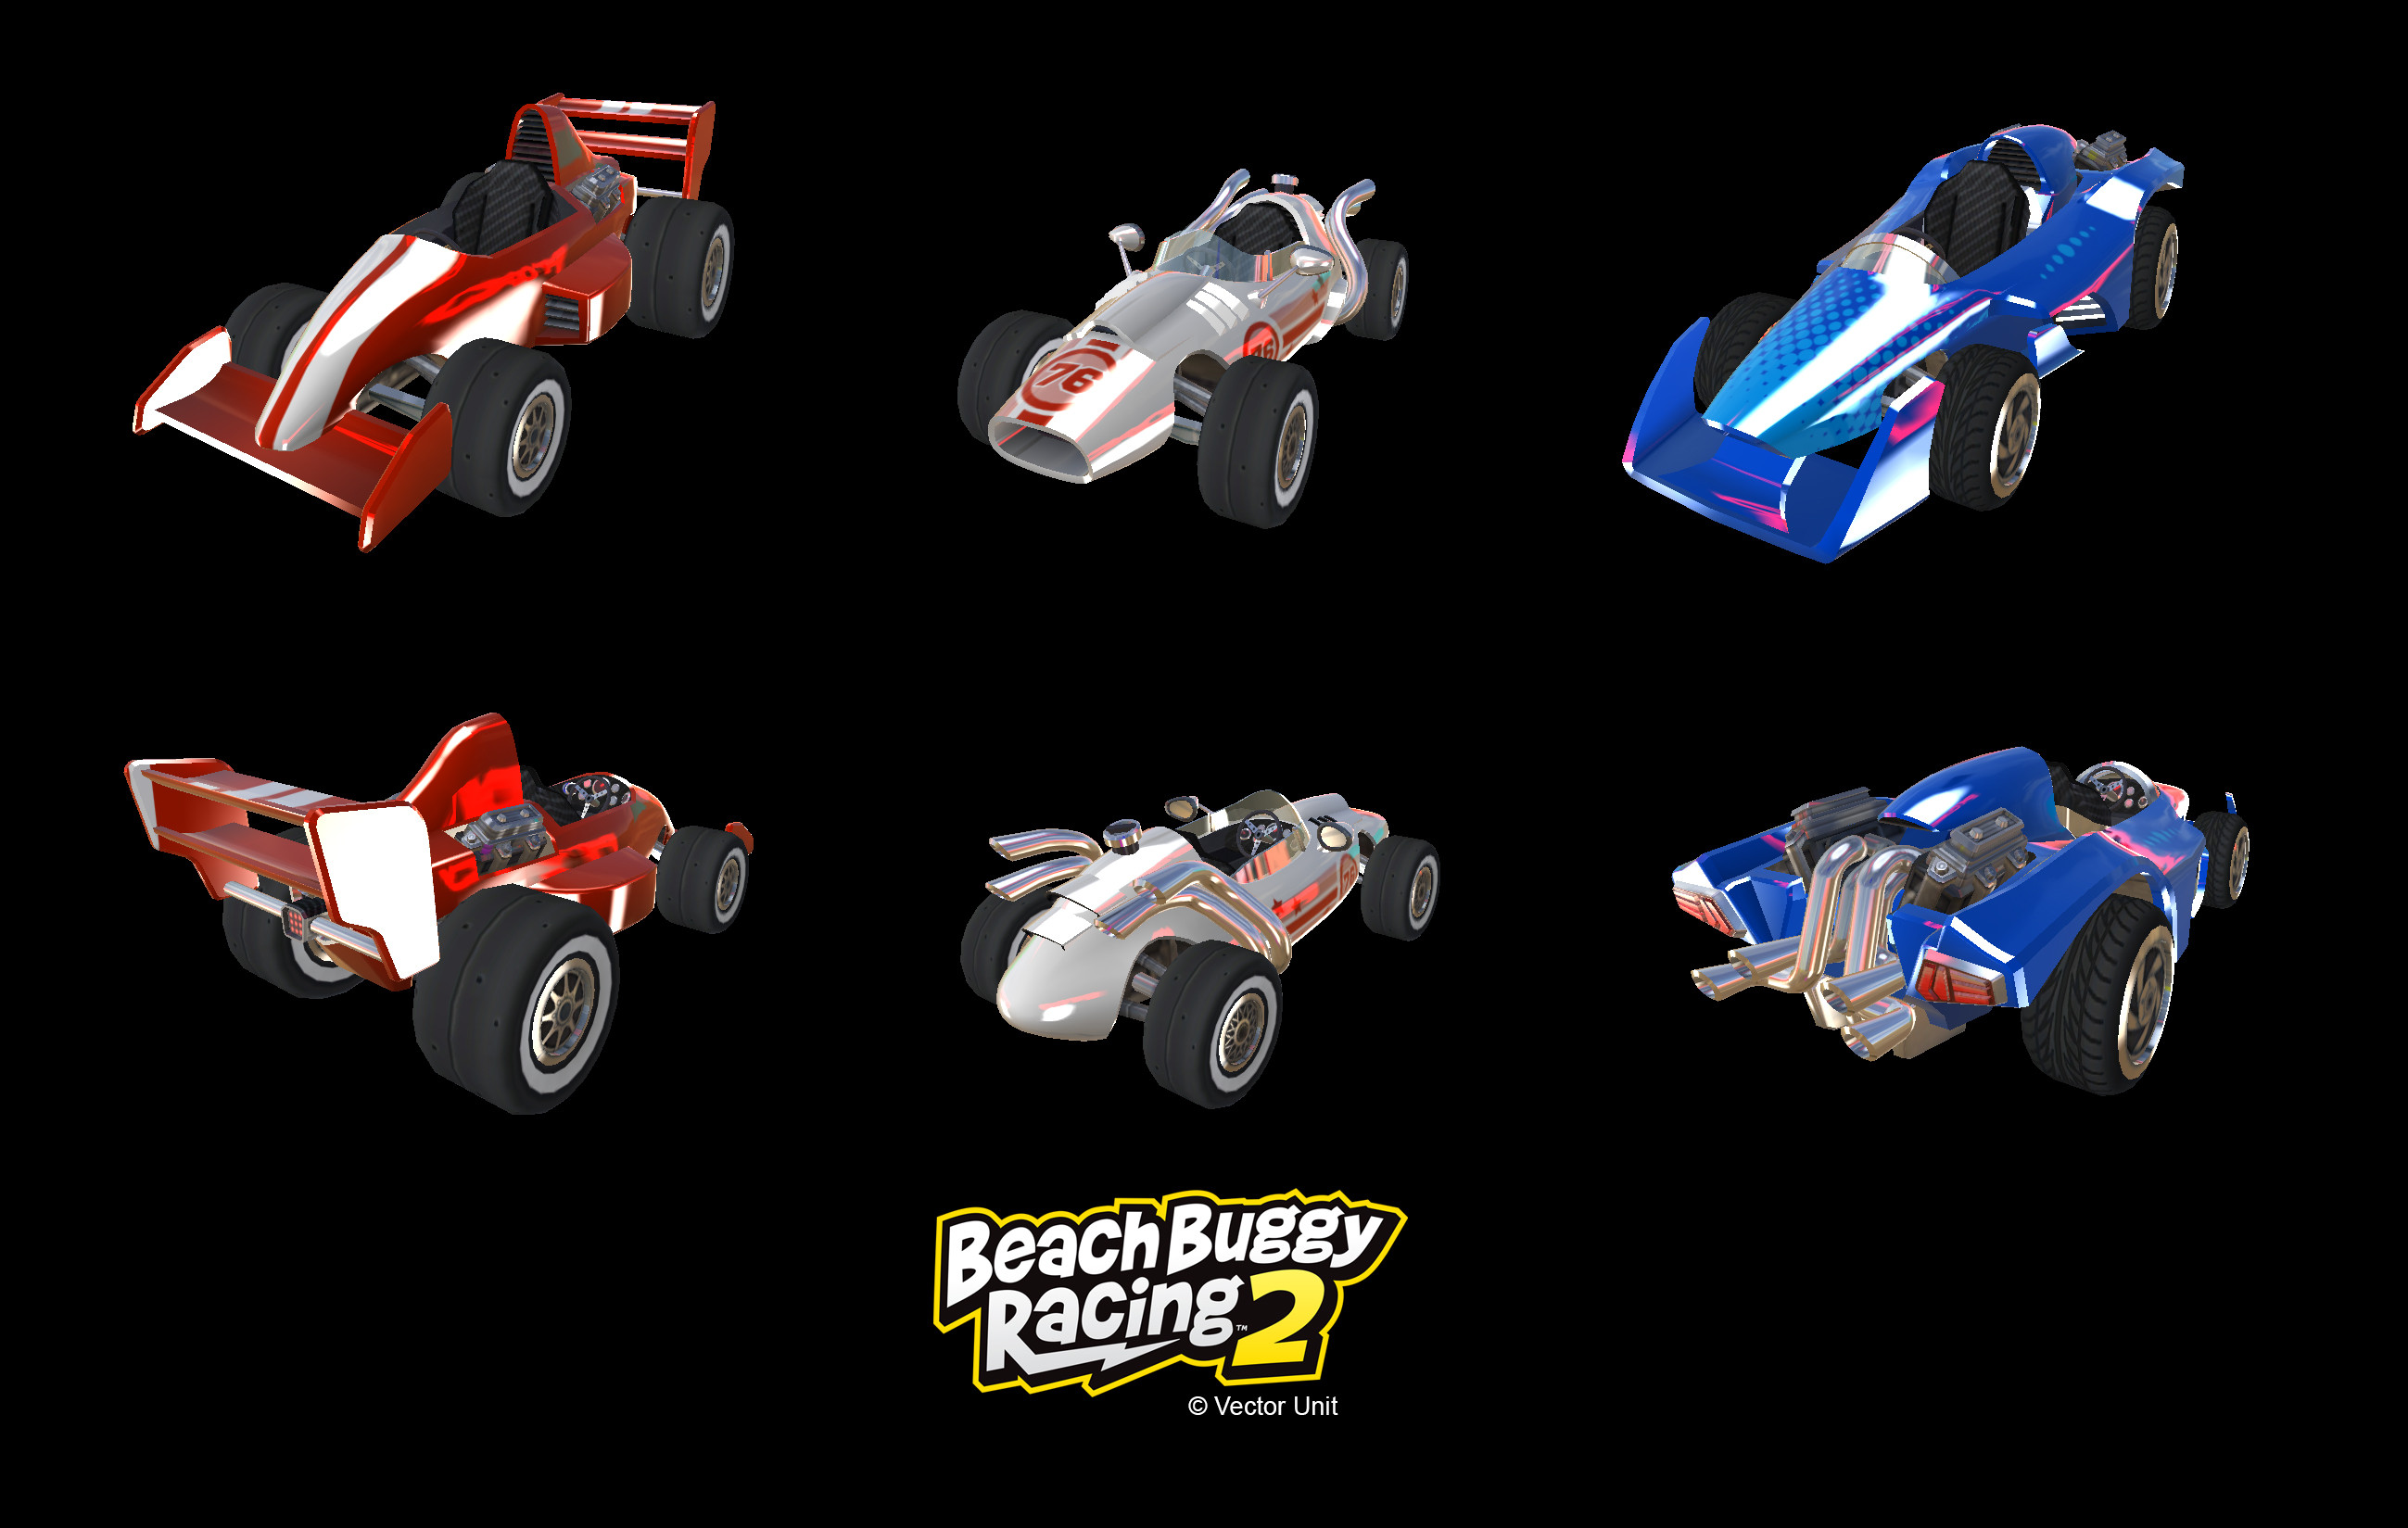 Beach Buggy Racing 2 Vehicles: Formula One Configurations